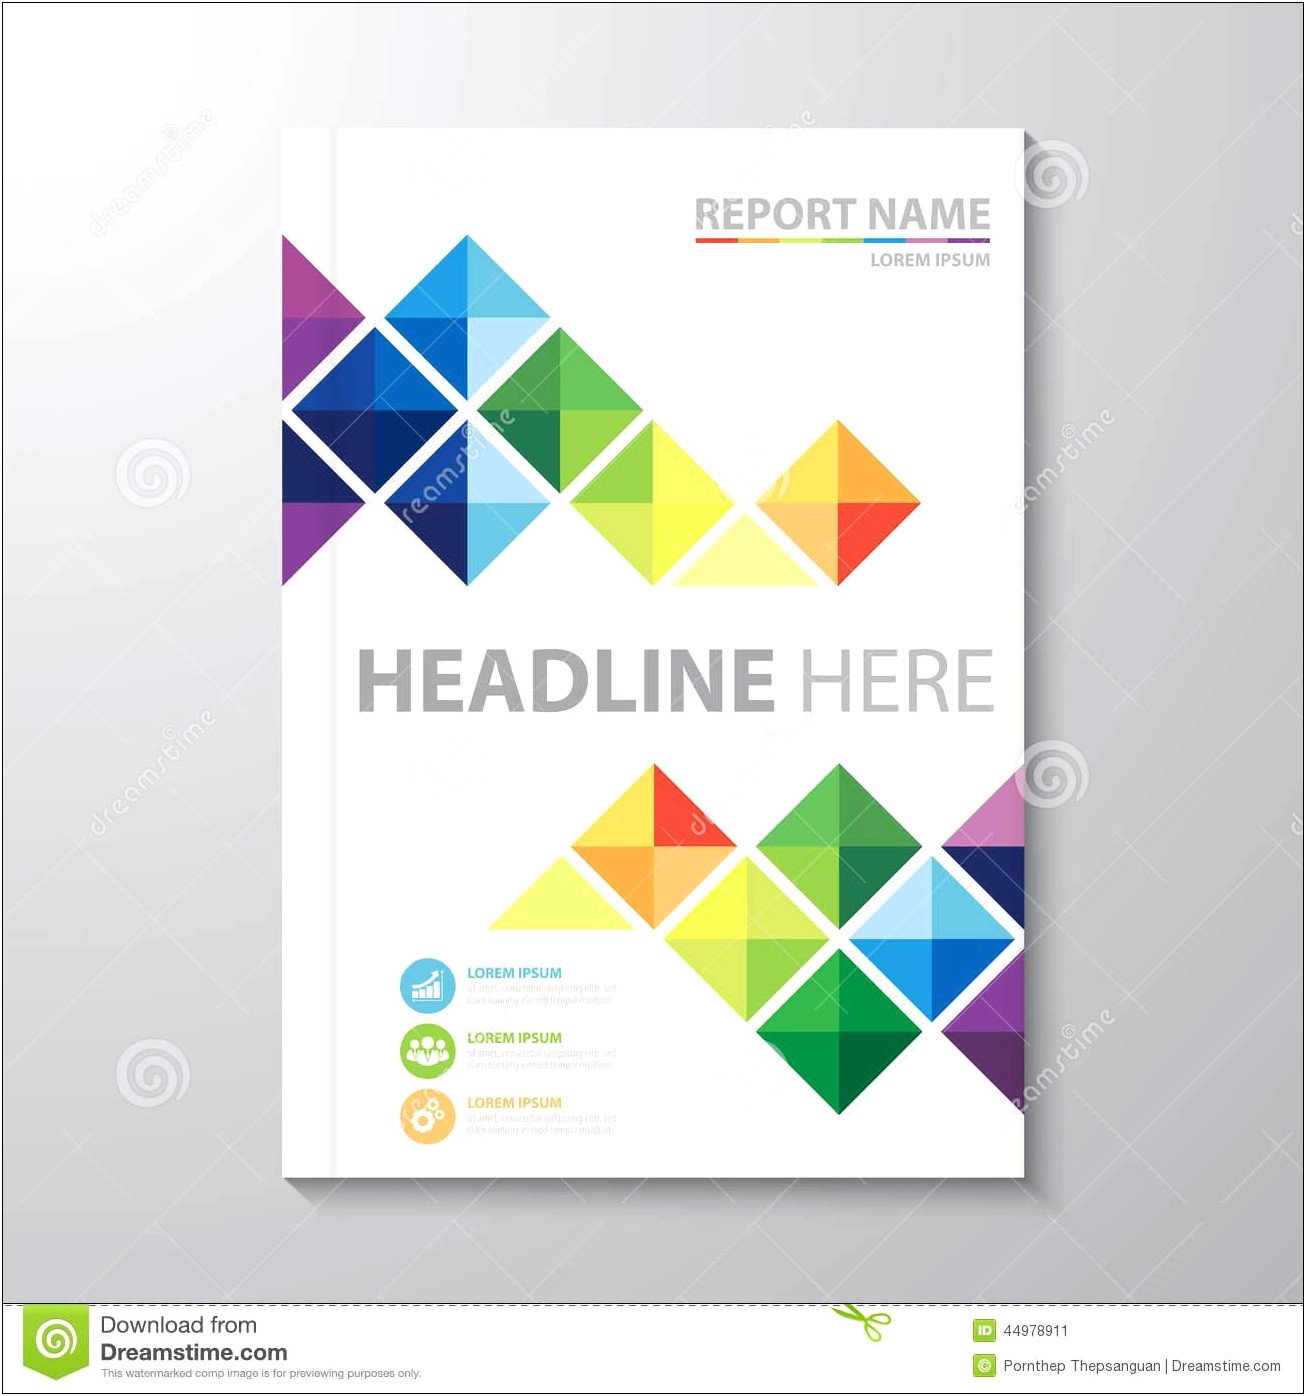 Report Cover Page Design Templates Free Download